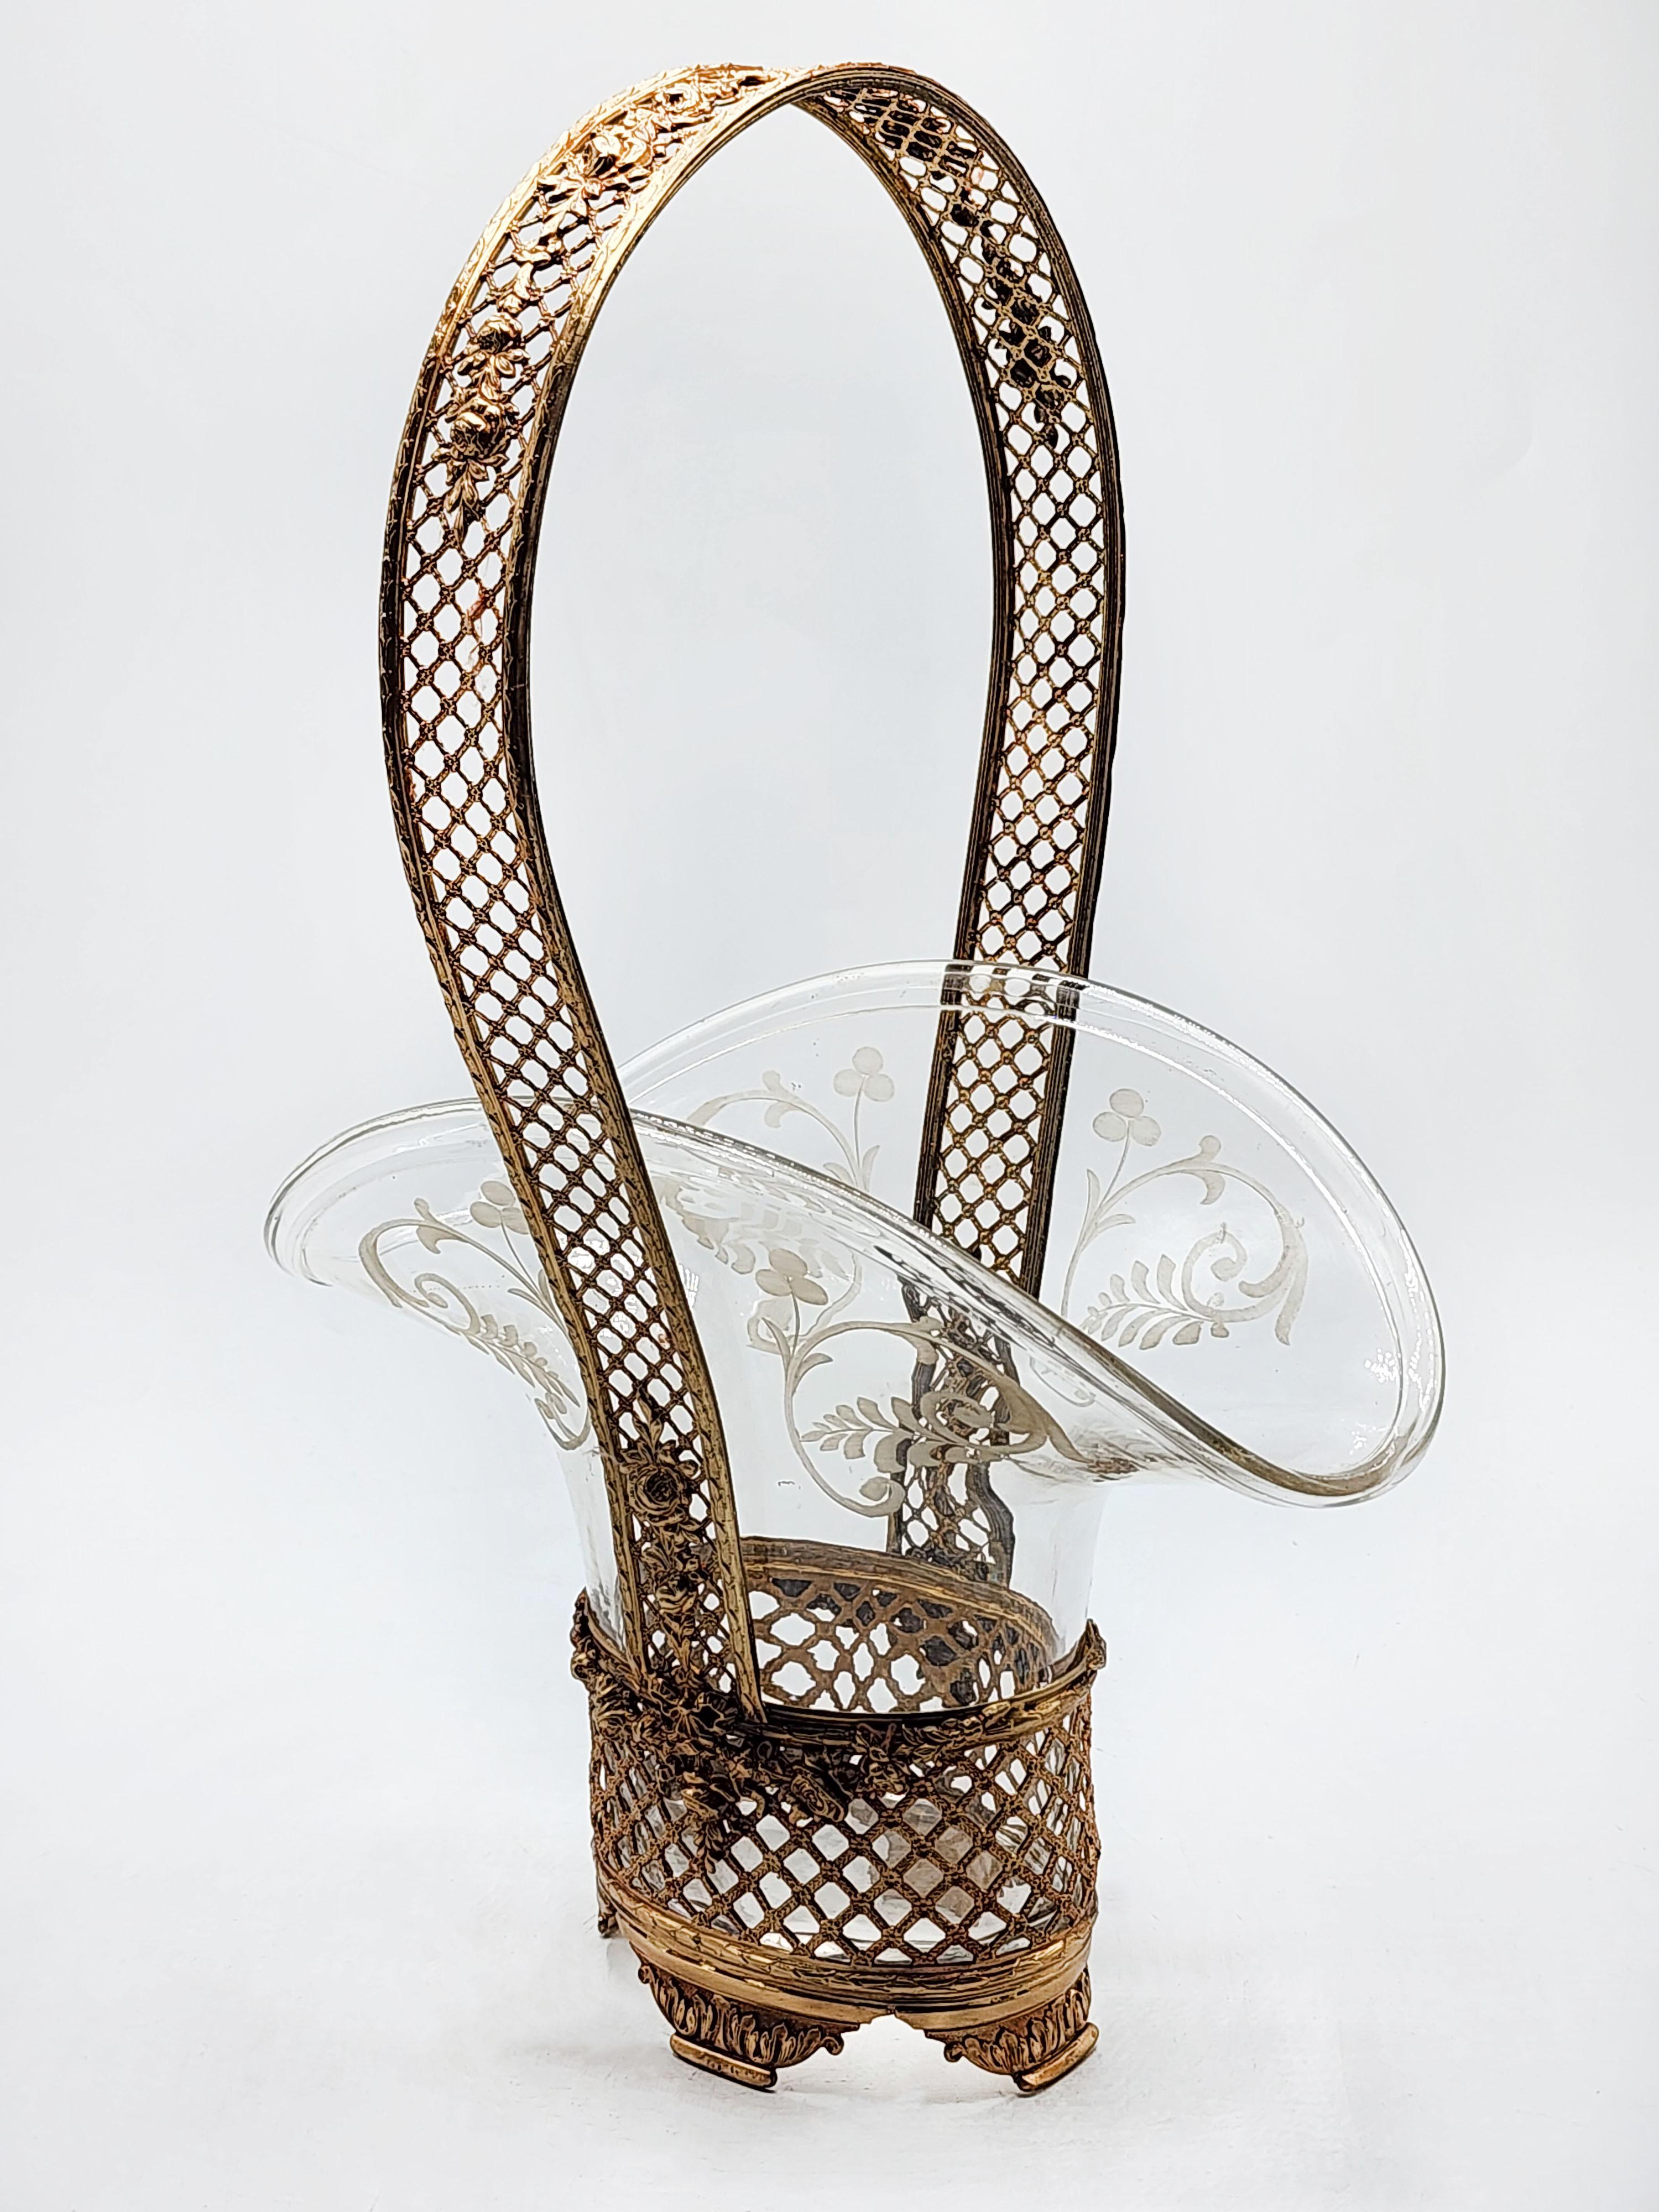 French Centerpiece Gilded Bronze Weave Open Crystal Basket
Beautiful centerpiece in gilded bronze interwoven with flower details on the glass and on the handles.
Measures:
Height: 38.5 centimeters
Length: 25 centimeters
Depth: 18.5 centimeters